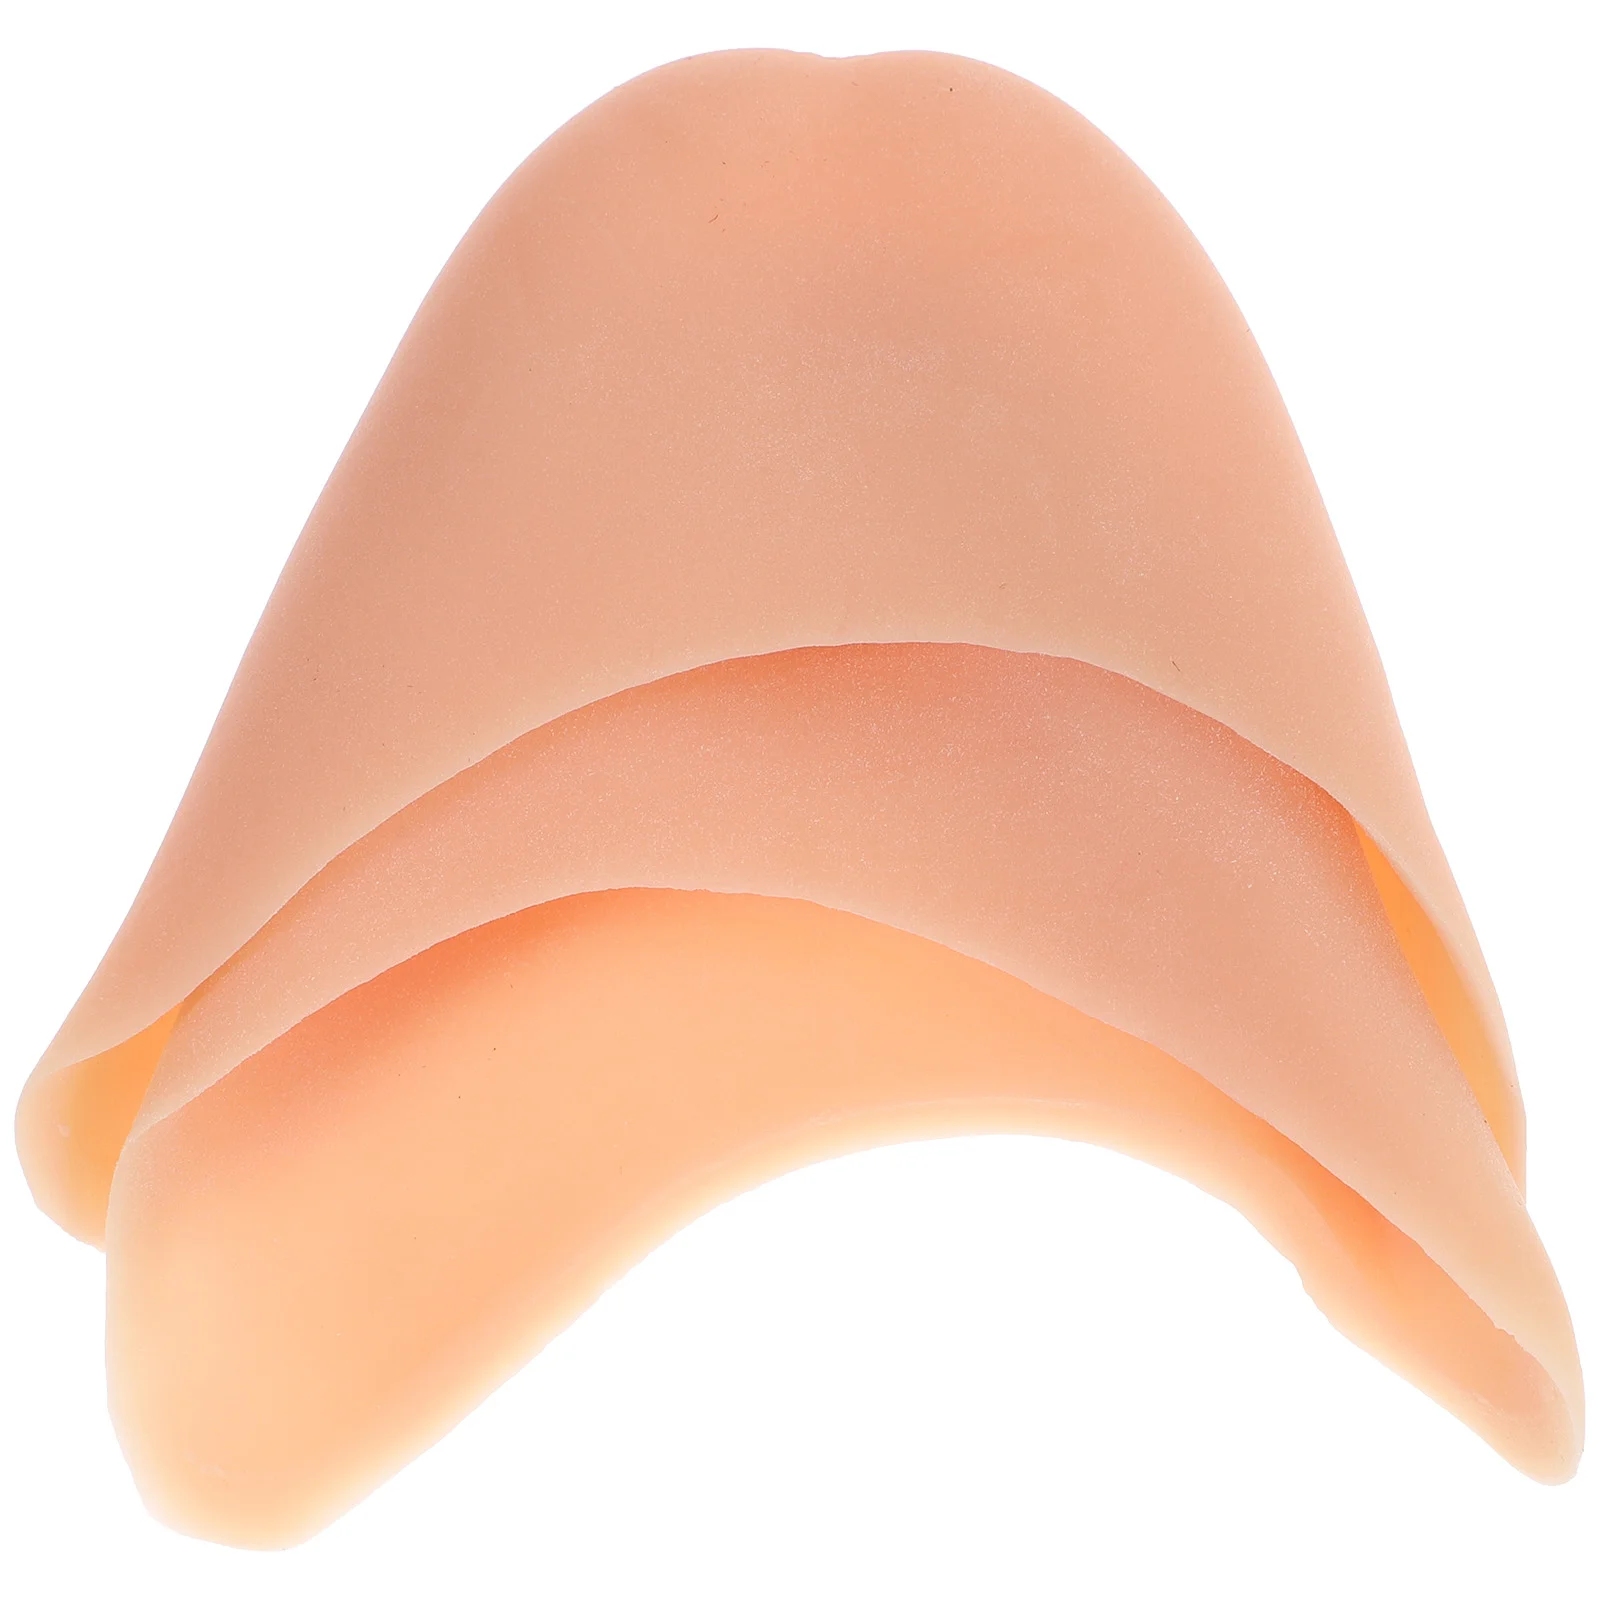 

A Pair of Silicon Ballet Shoes Toe Caps /Toe Pads /Protector Gel (Nude)